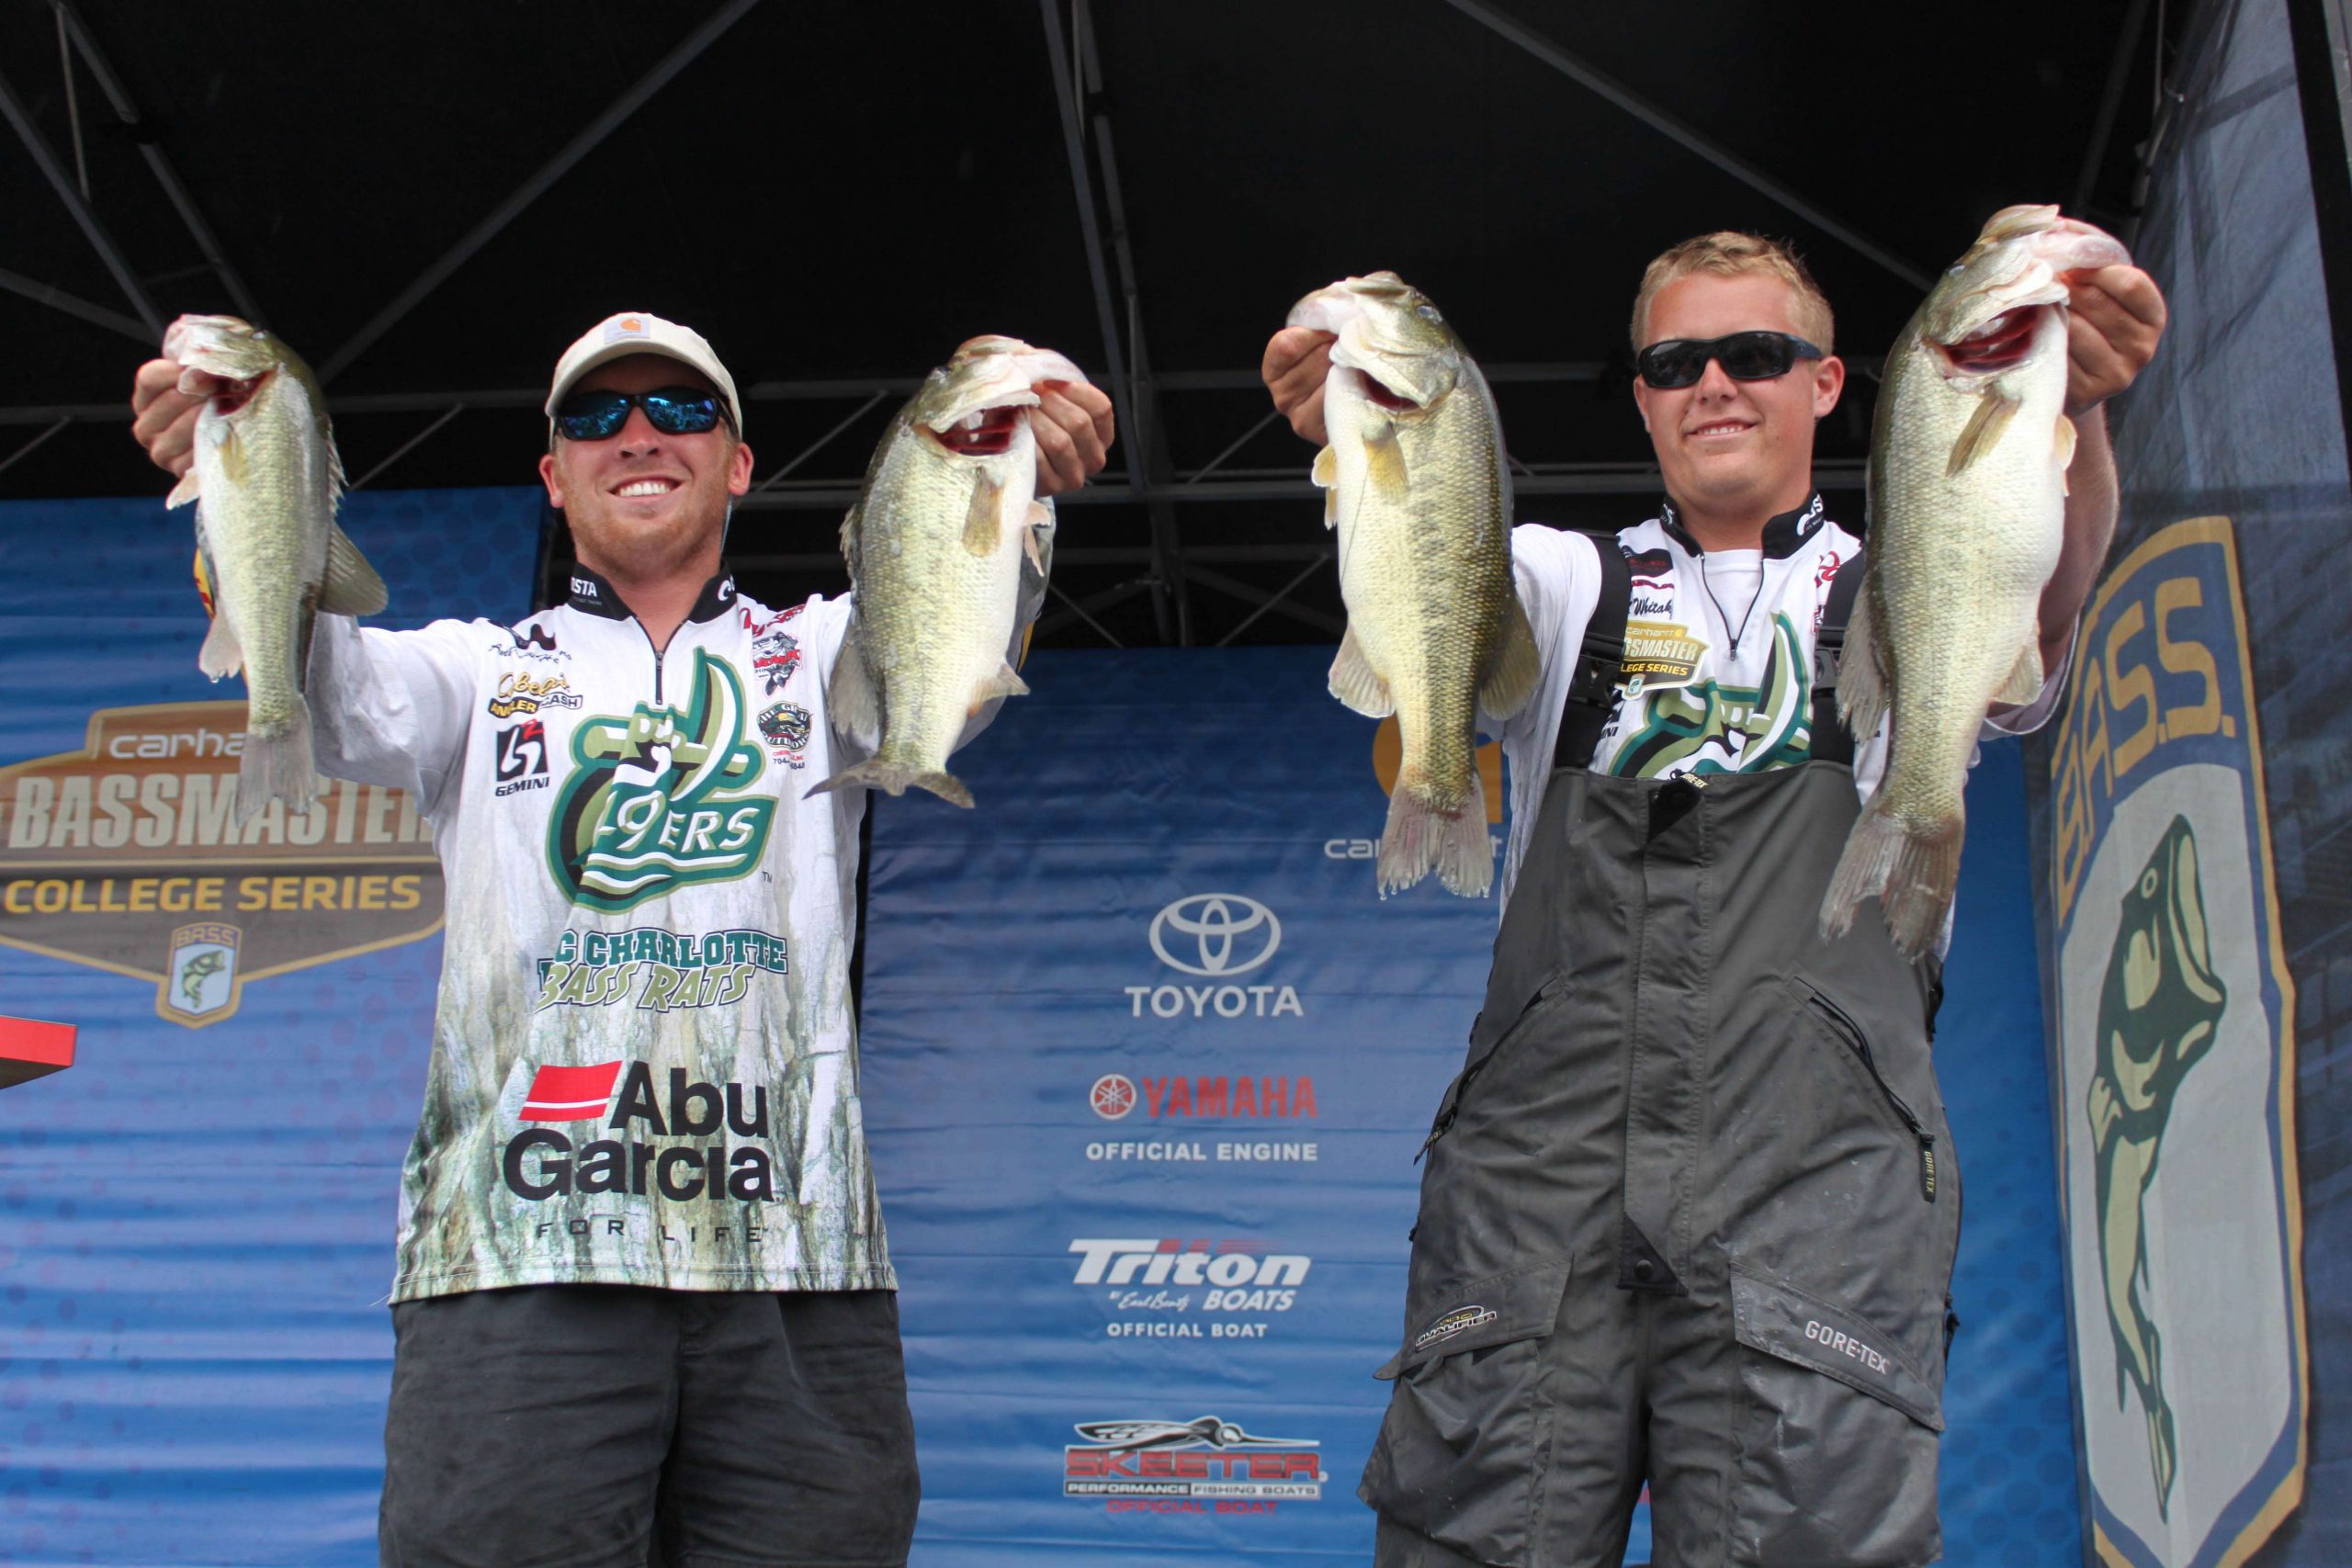 Top college anglers to compete in national championship - Bassmaster